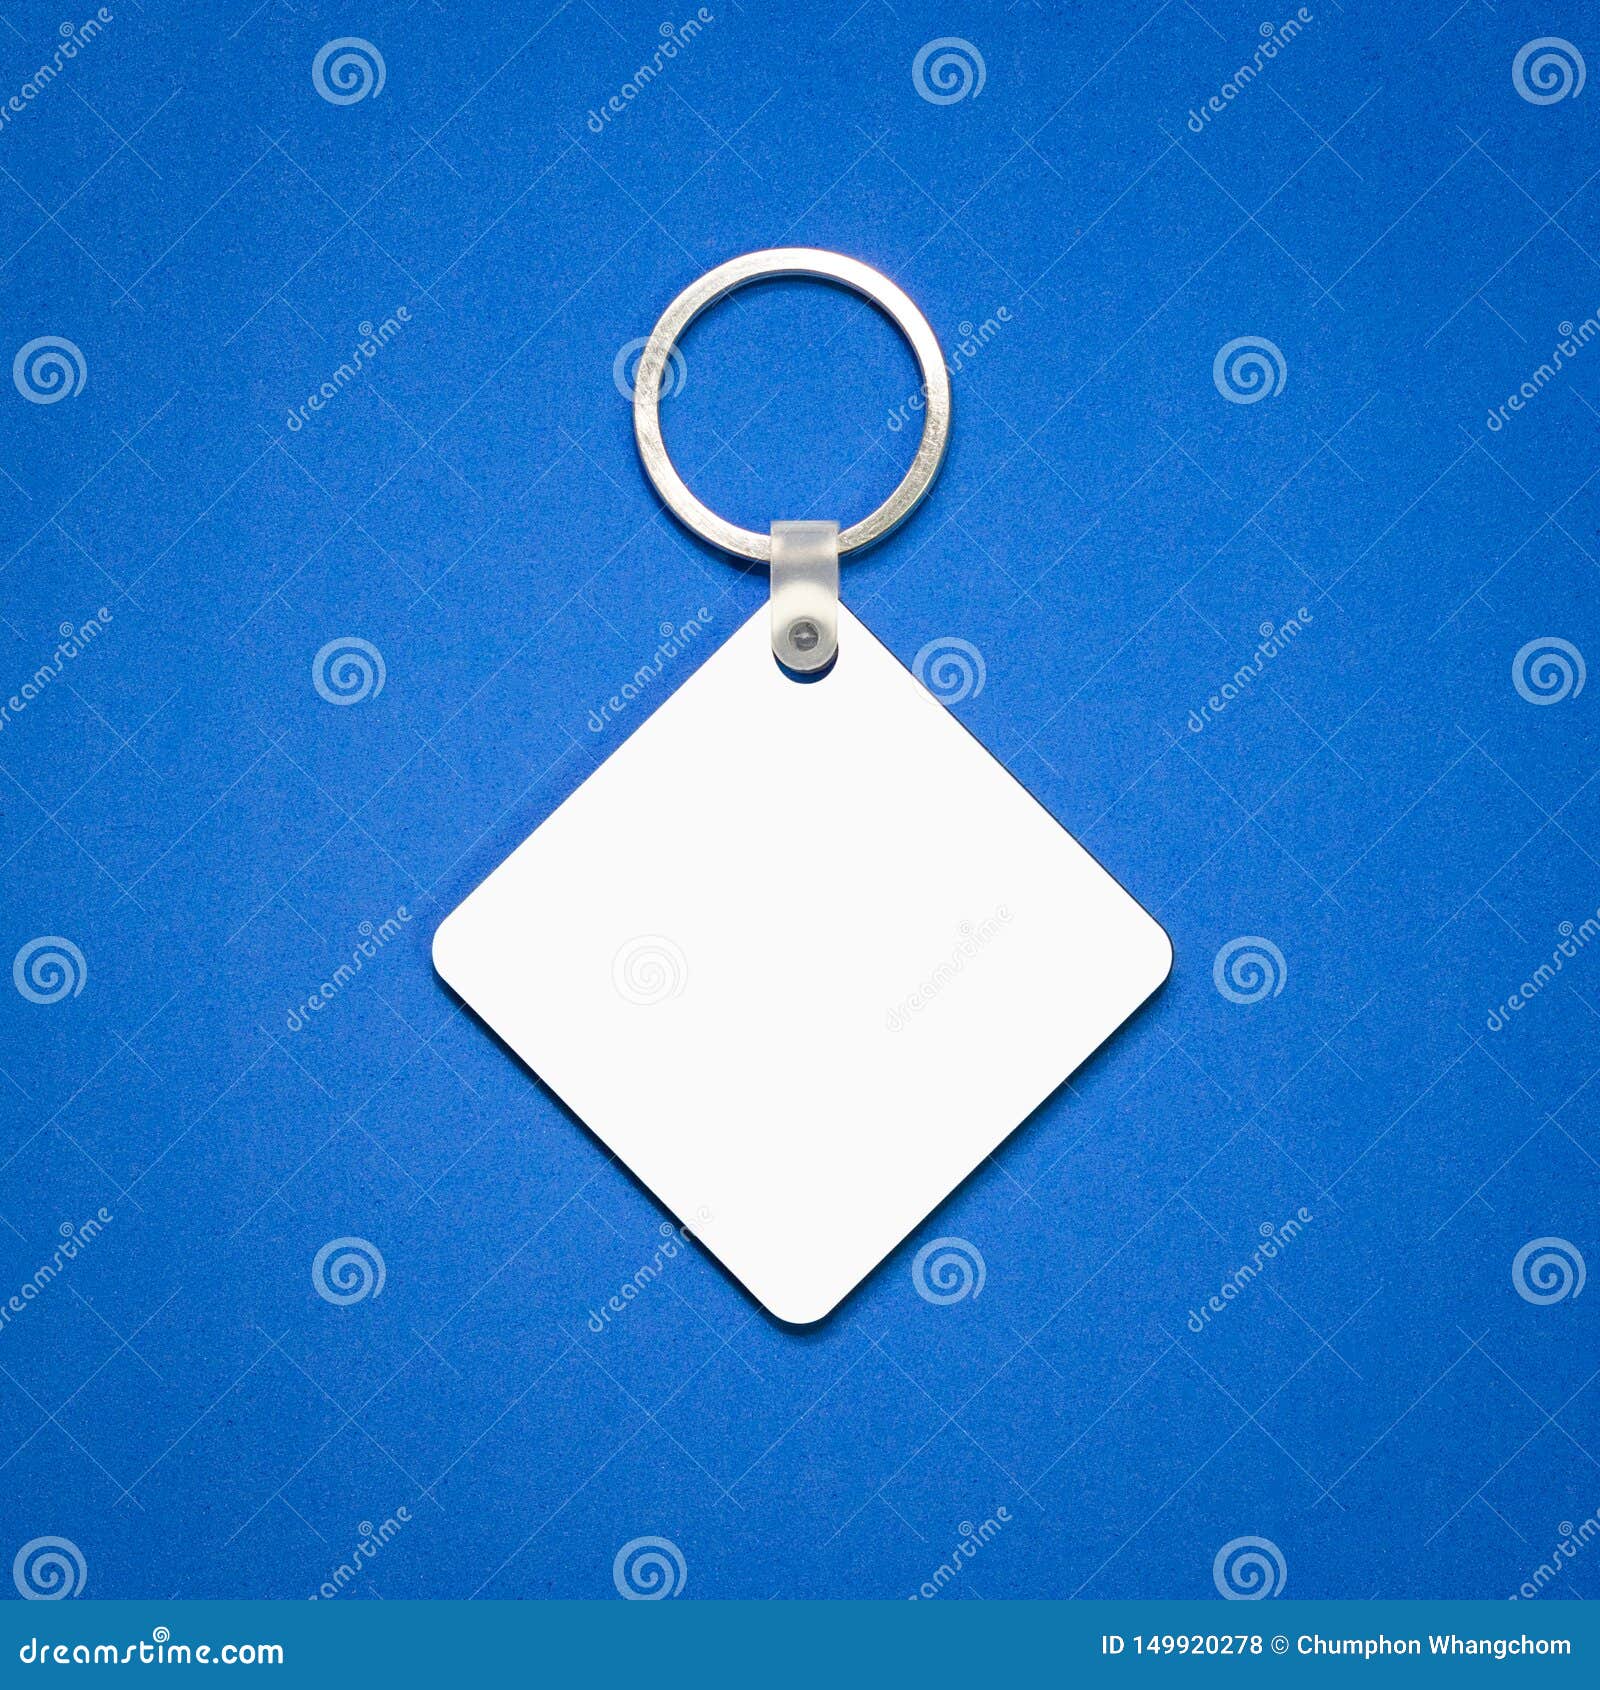 Download 134 Key Chain Mockup Photos Free Royalty Free Stock Photos From Dreamstime